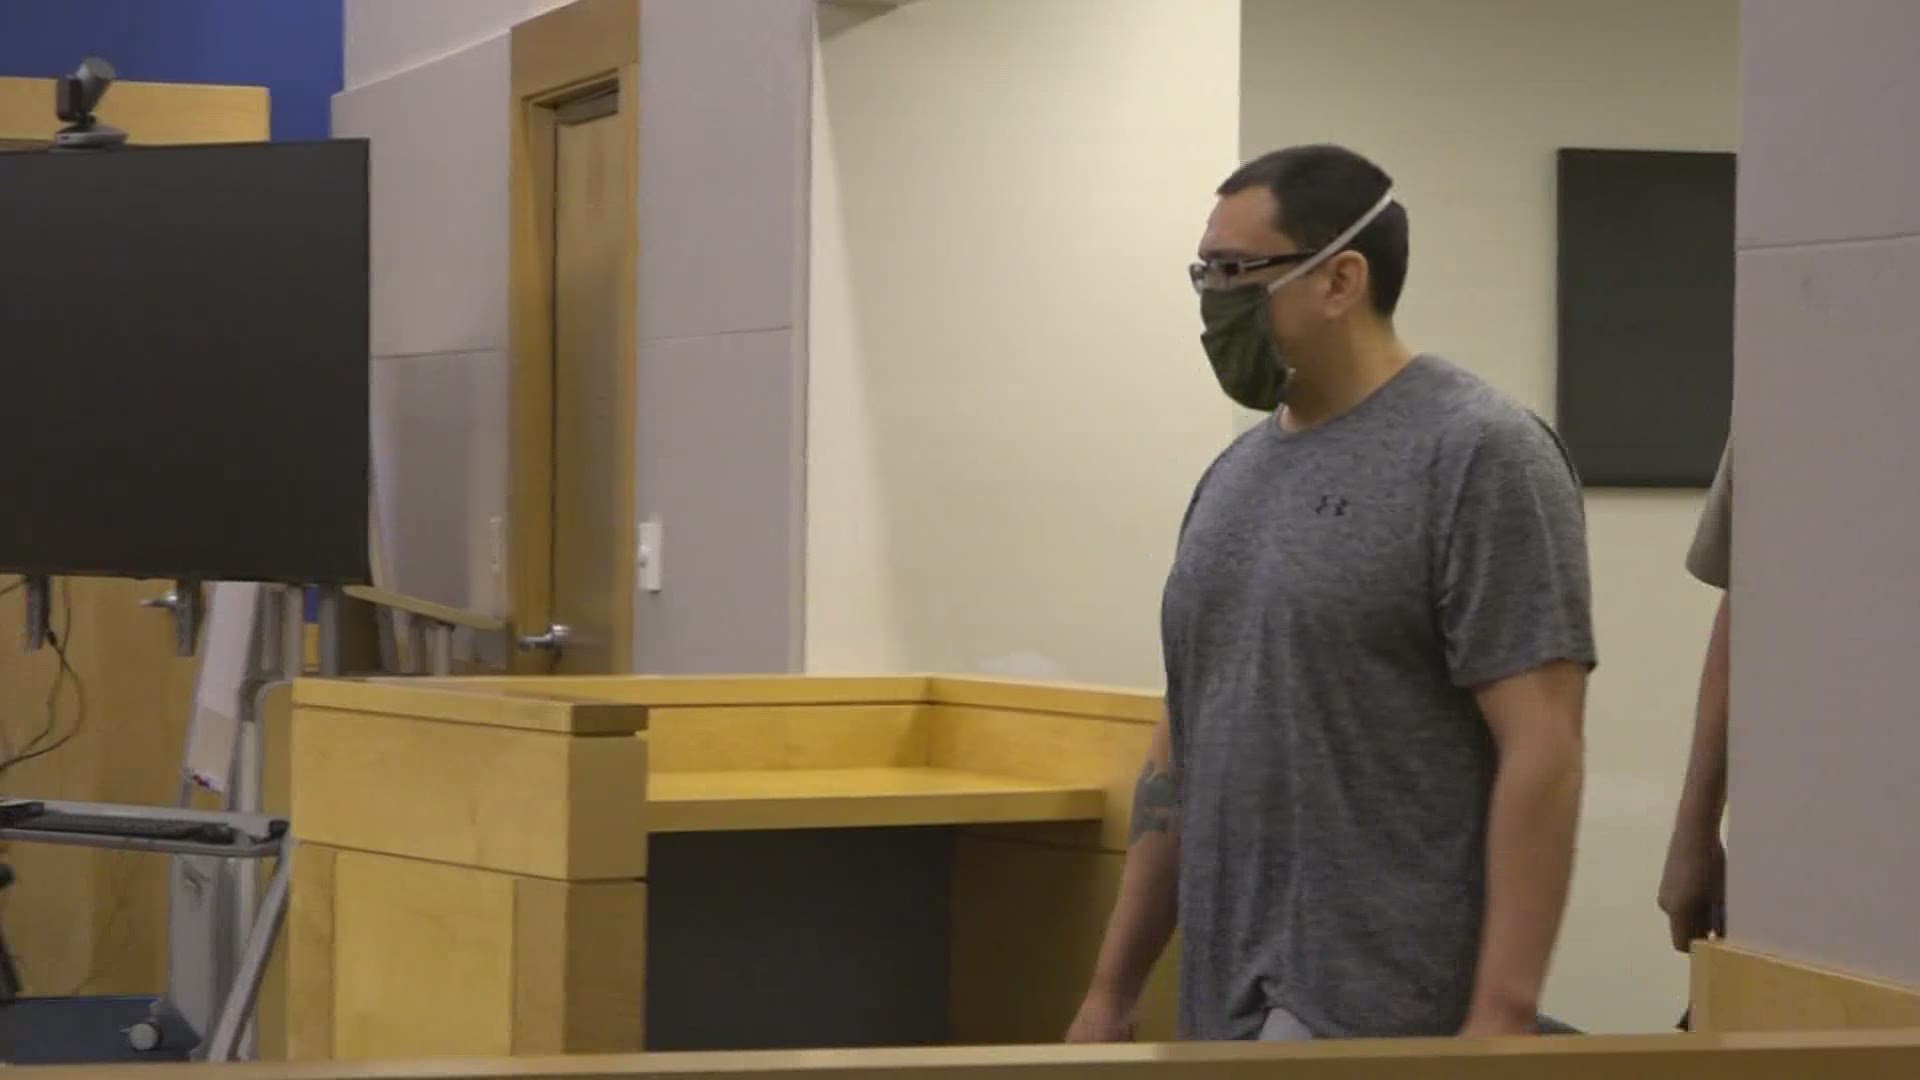 Choneska’s defense team argued that there is no hard evidence tying him to the crime and because he is not a flight risk he is a good candidate for bail.